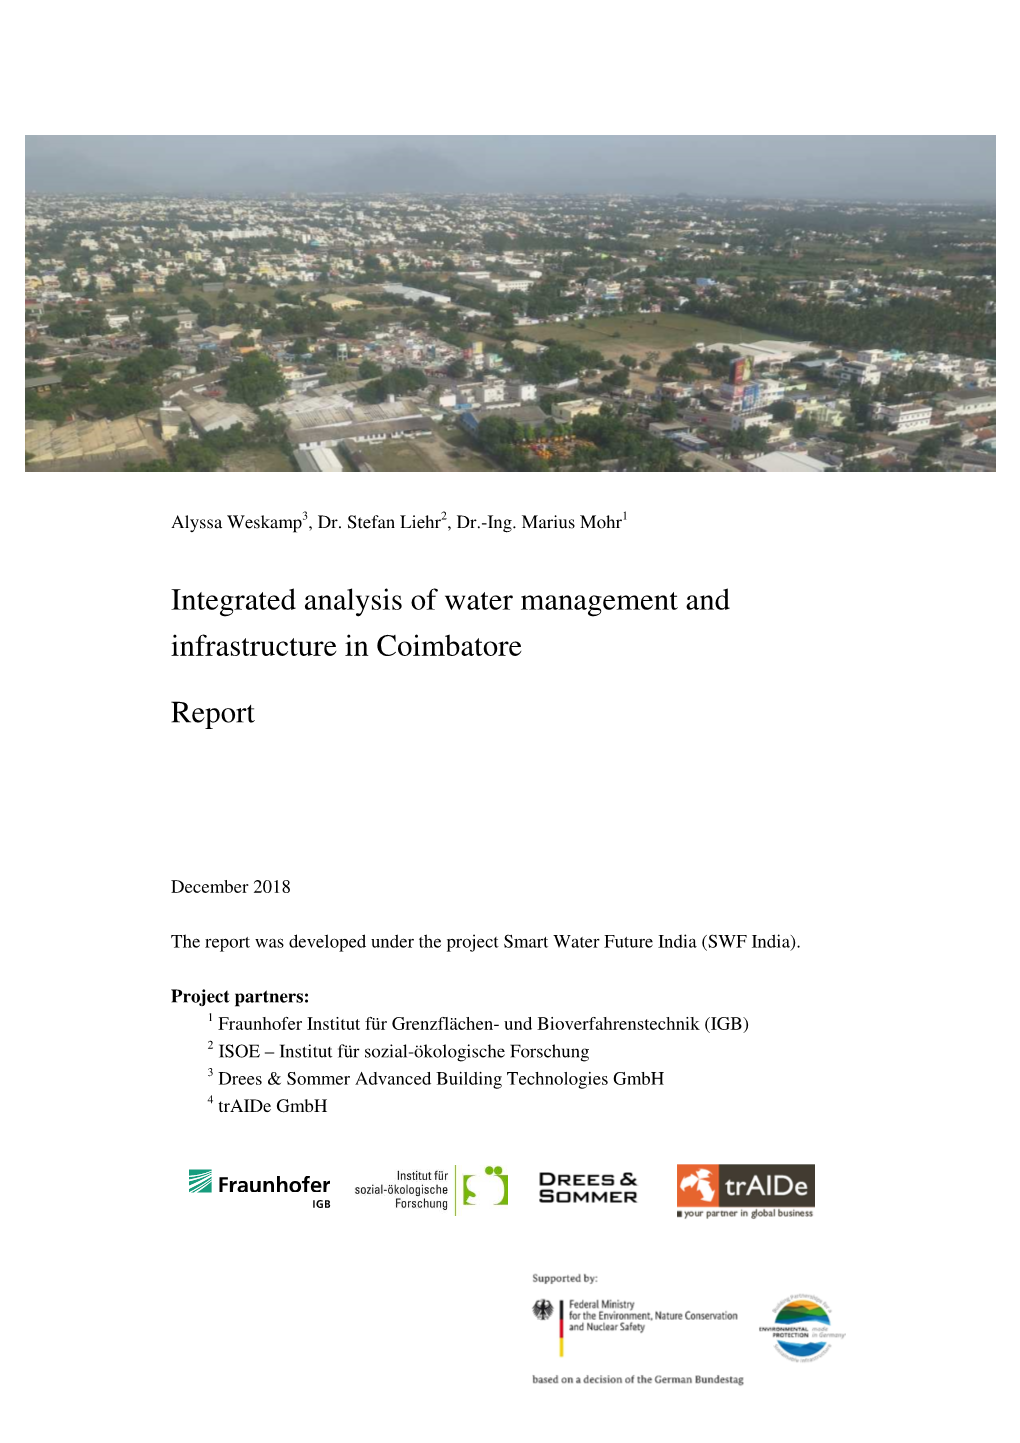 Integrated Analysis of Water Management and Infrastructure in Coimbatore